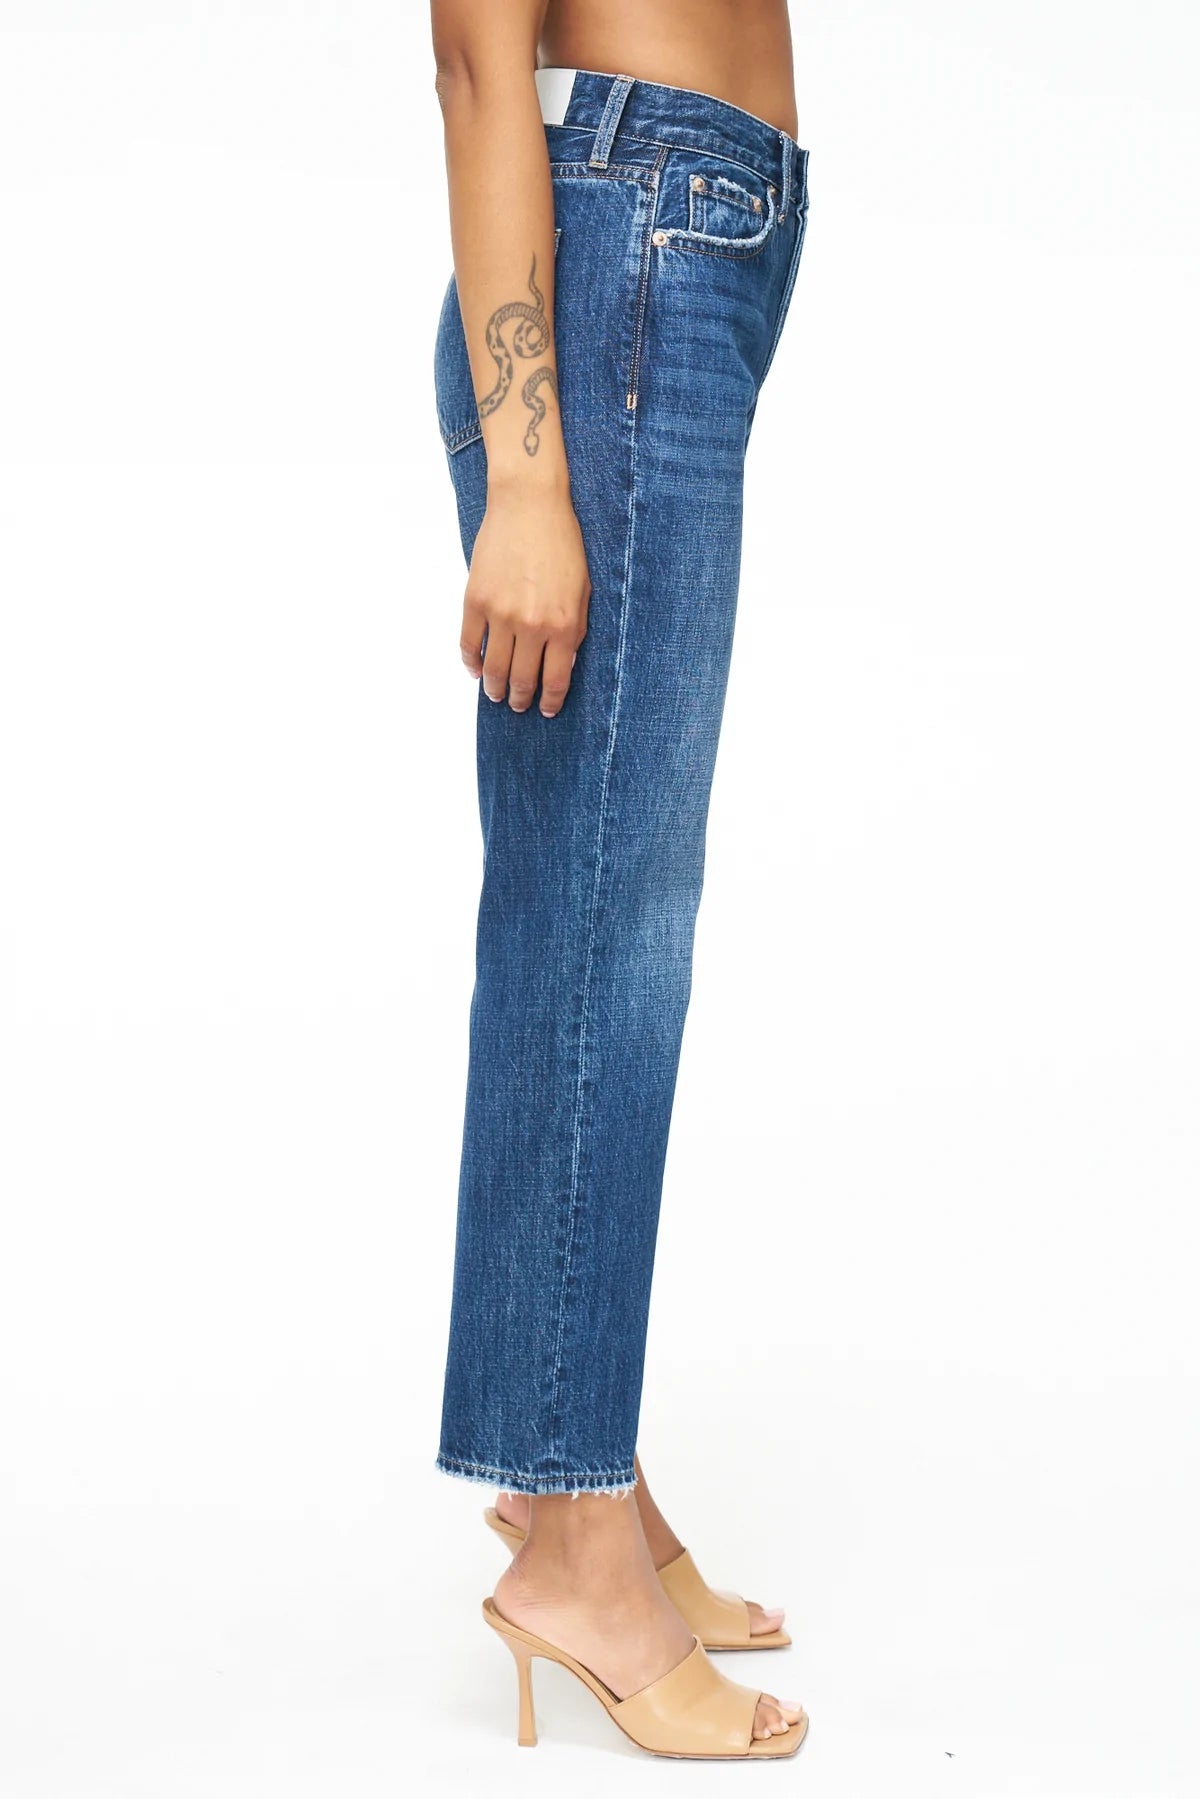 PISTOLA Charlie High Rise Classic Straight Pacific Jeans